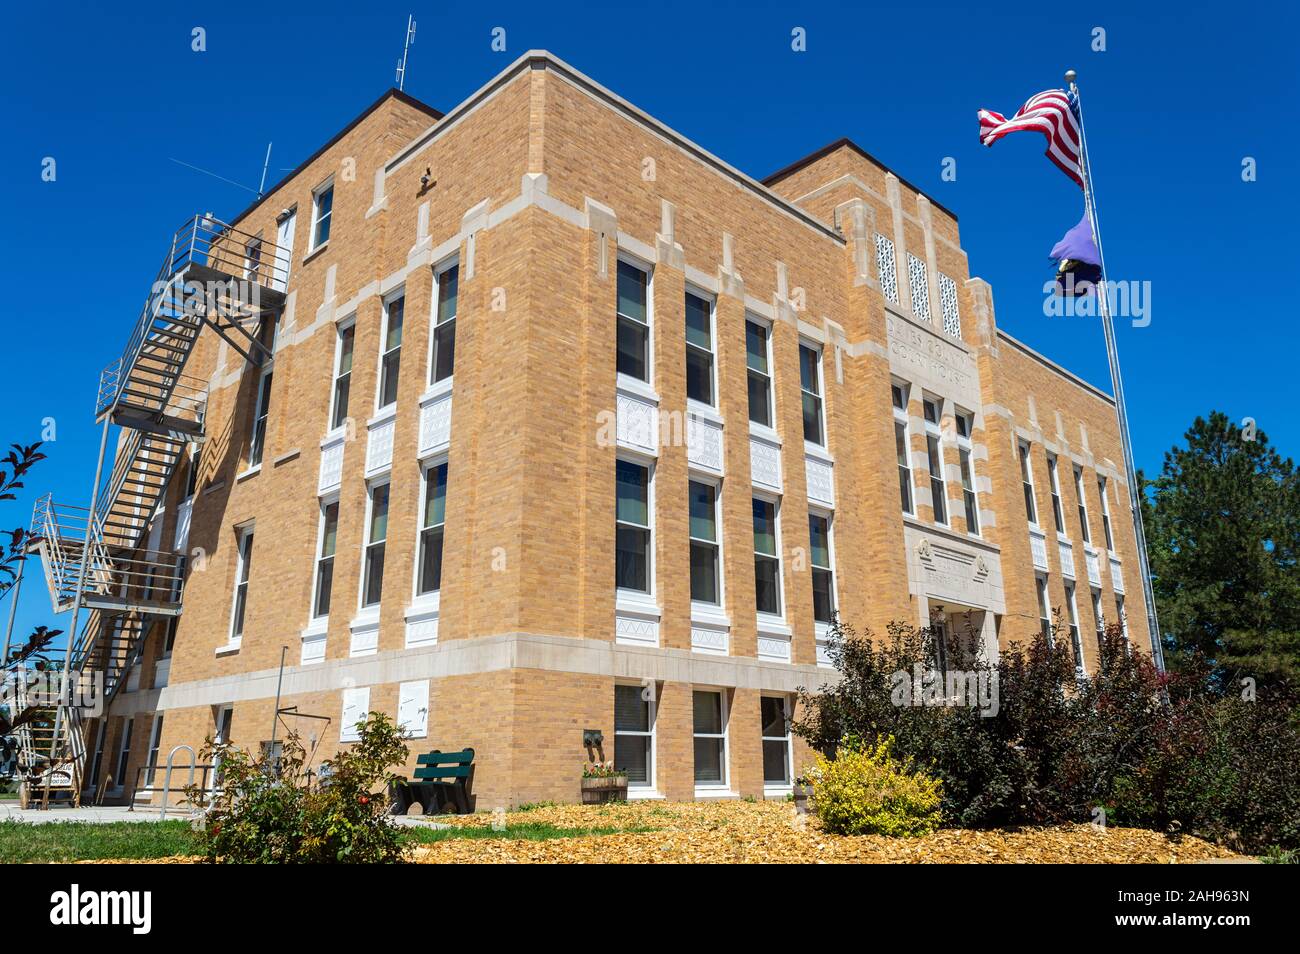 Chadron, Nebraska - July 25, 2014: The Flag Flies in Front of the Dawes County Courthouse Stock Photo